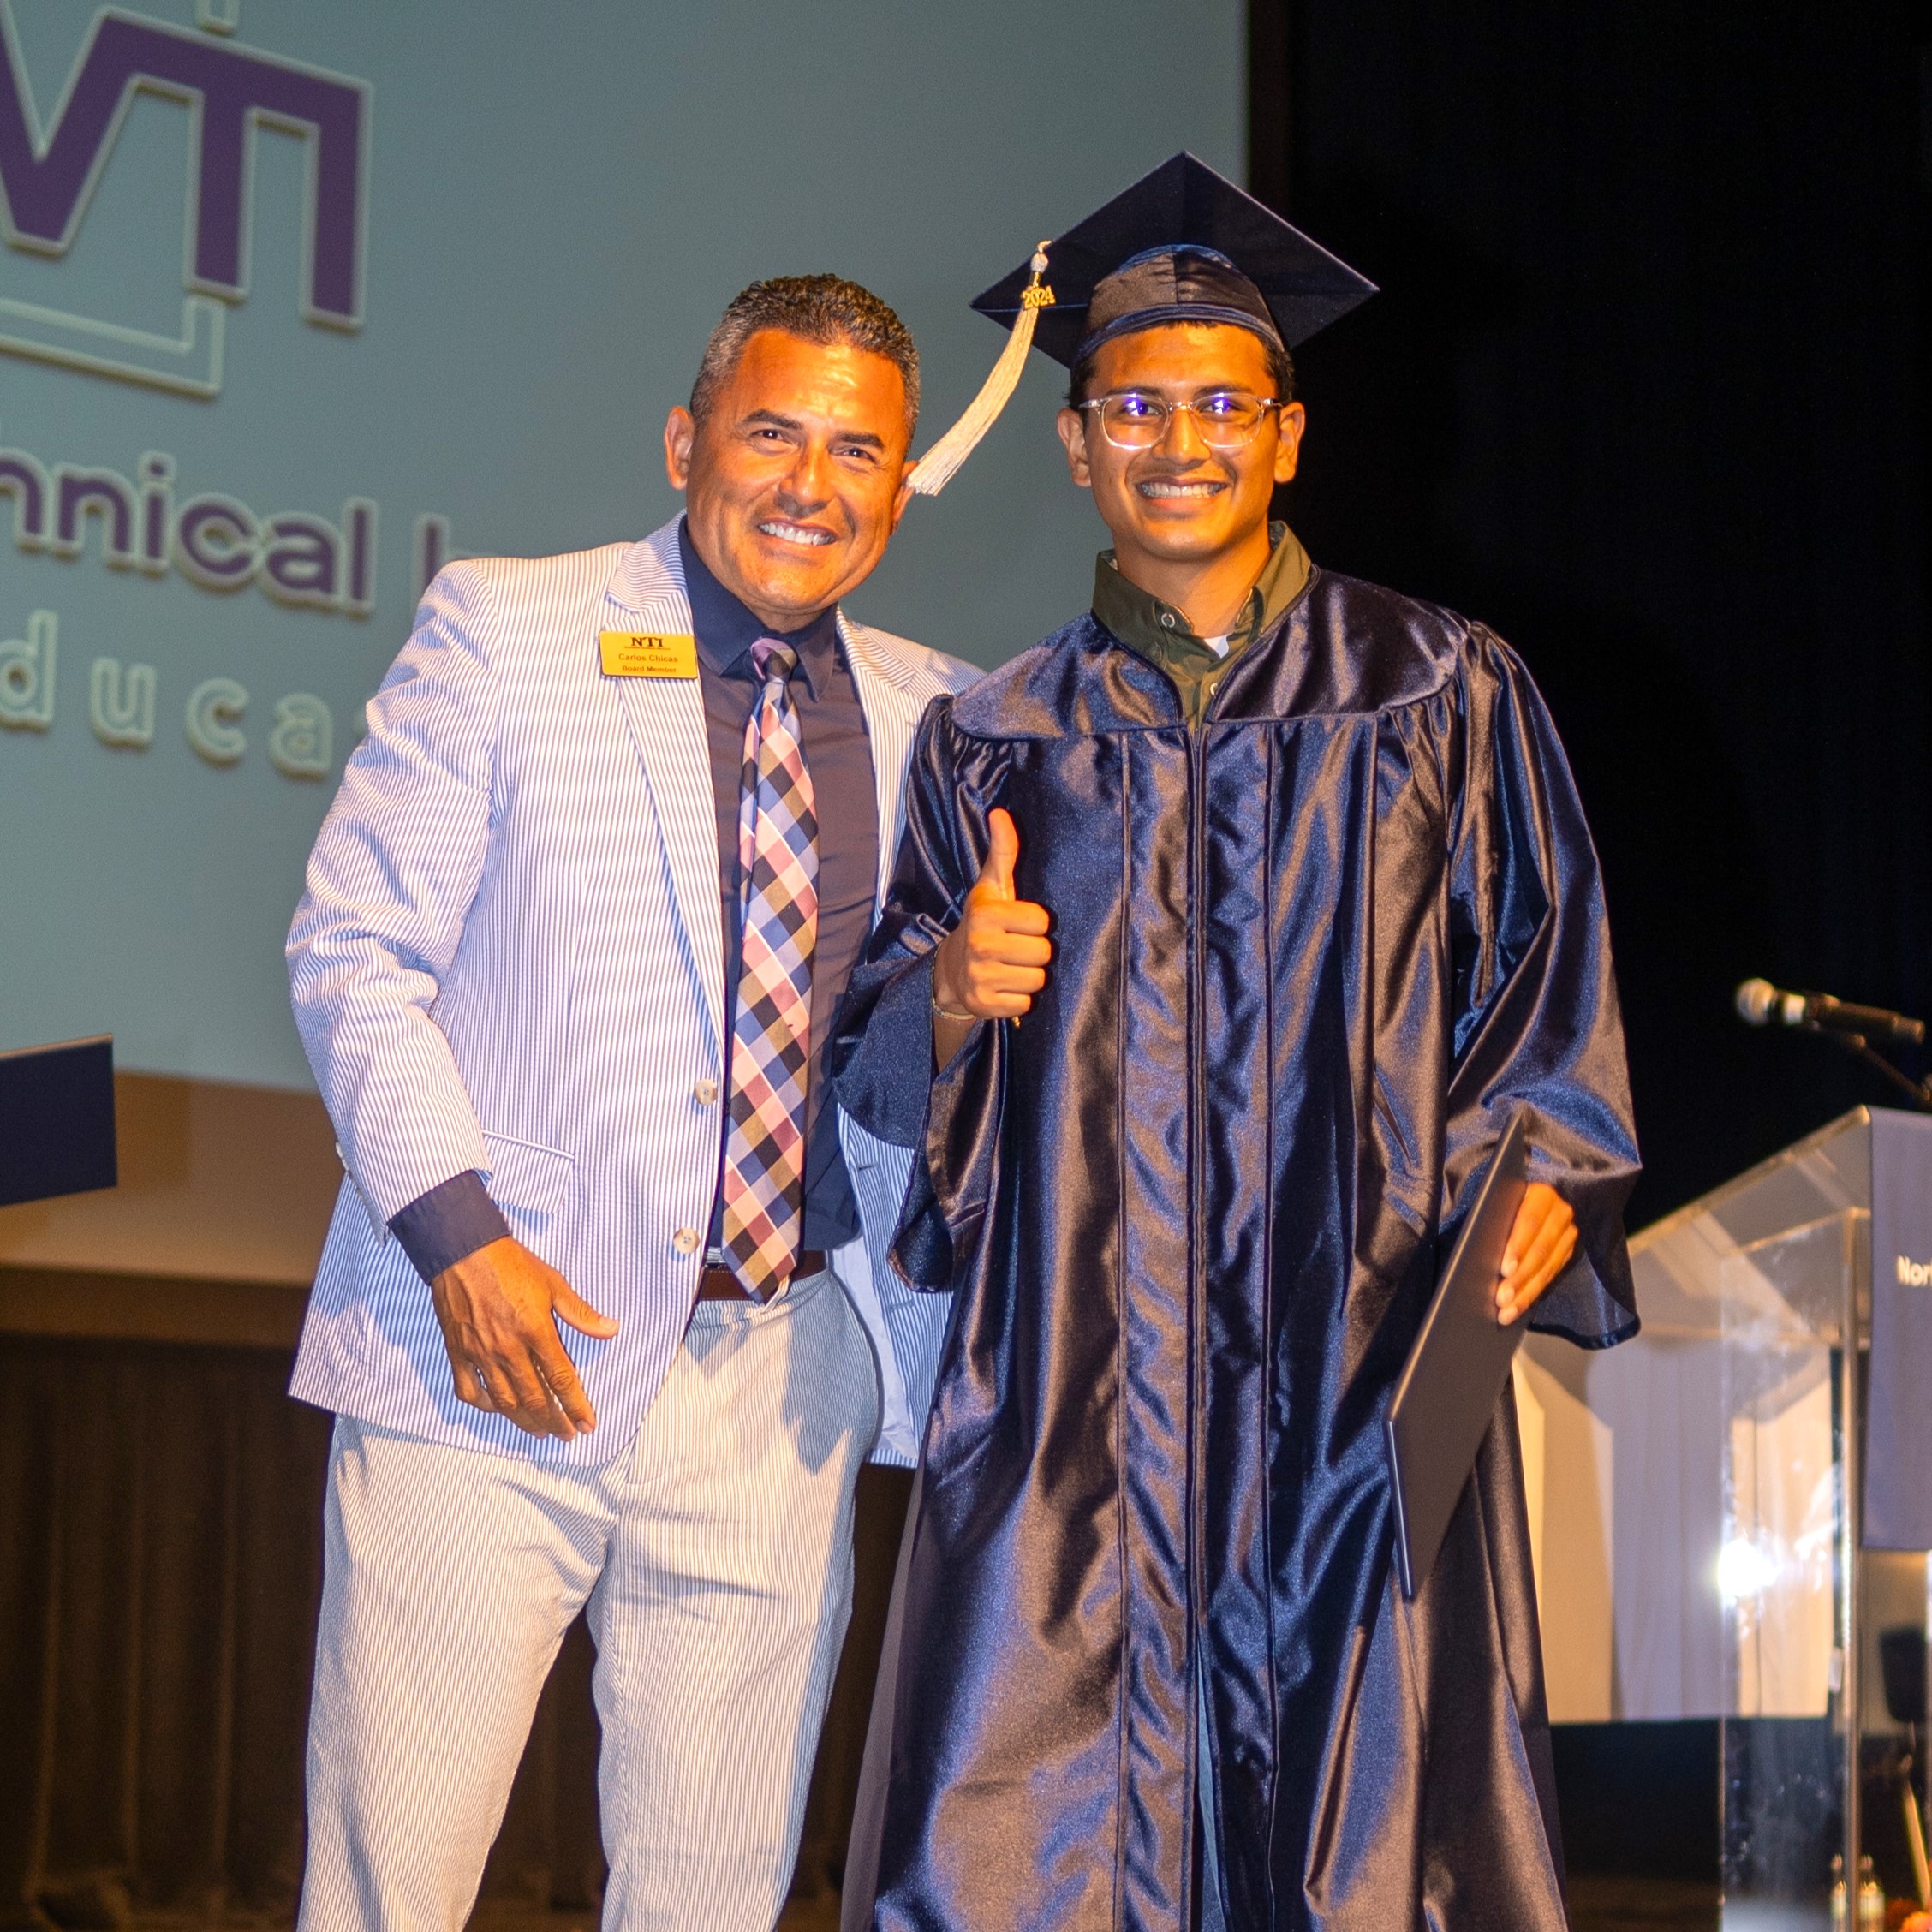 carlos chicas poses onstage with a grad